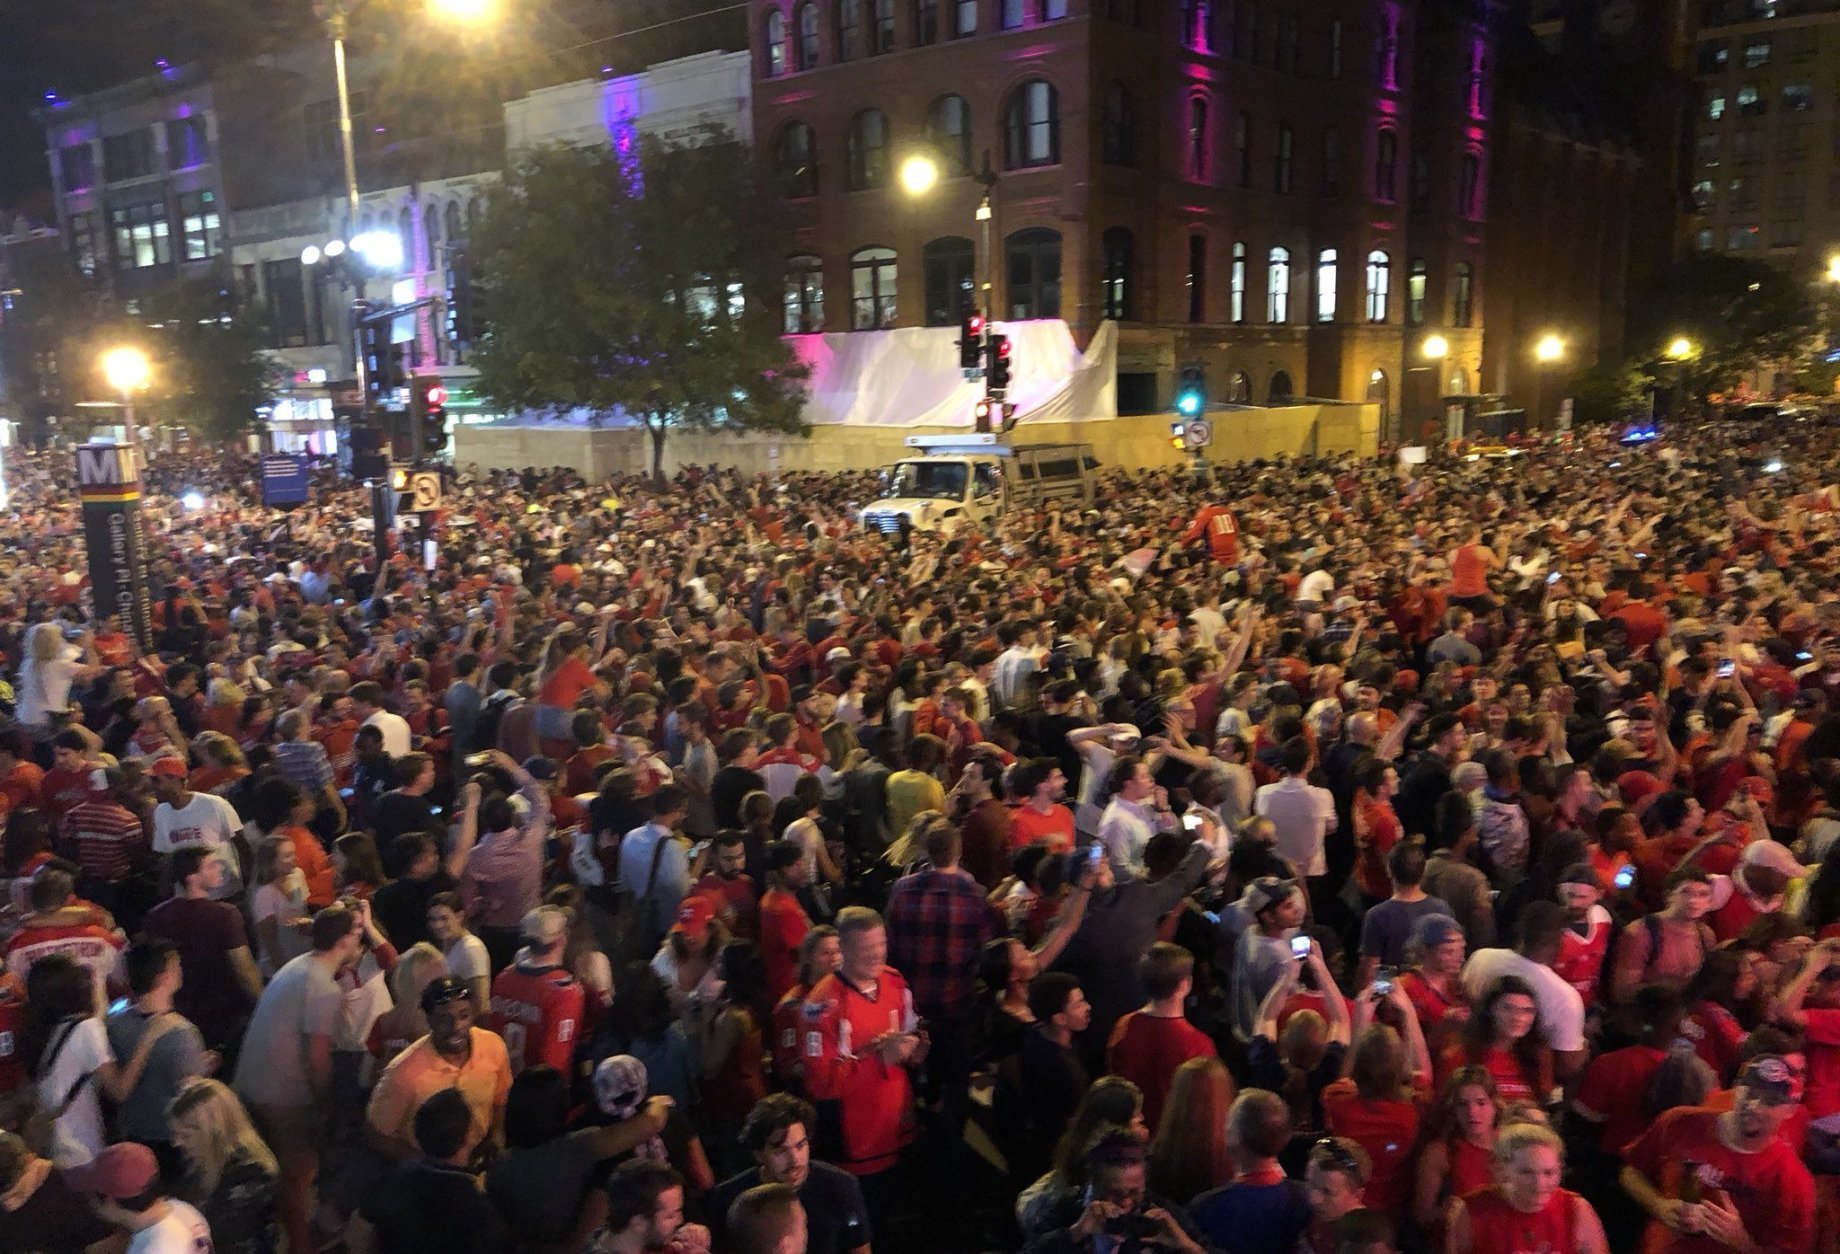 Even those who can't get inside to see history firsthand Wednesday night will still be able to celebrate outside during an outdoor viewing party at G and Seventh streets Northwest. (WTOP/Dave Dildine, file)